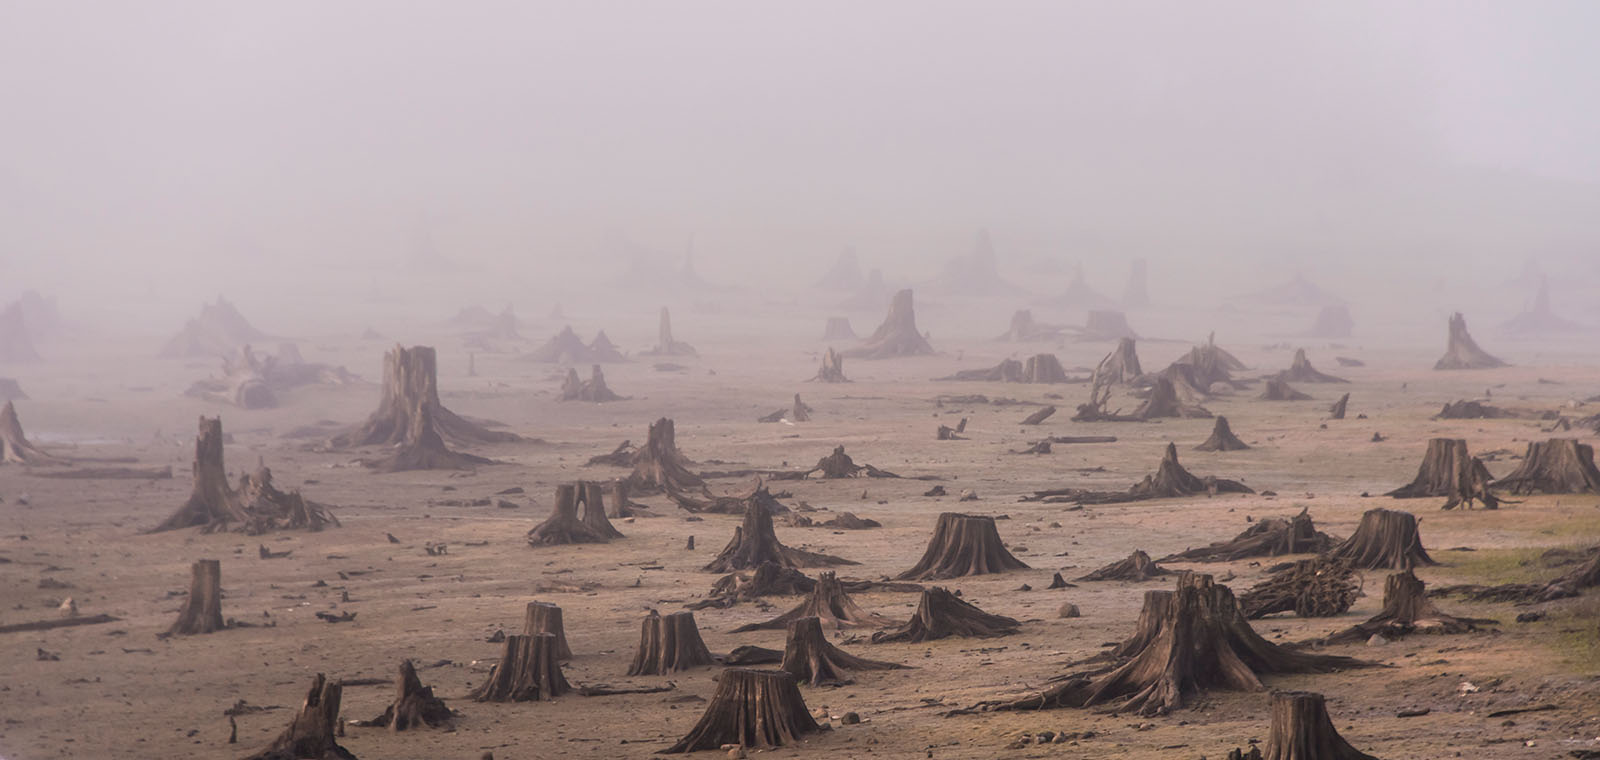 Hundreds of tree stumps on a barren forest floor fade into dirty brown smog.